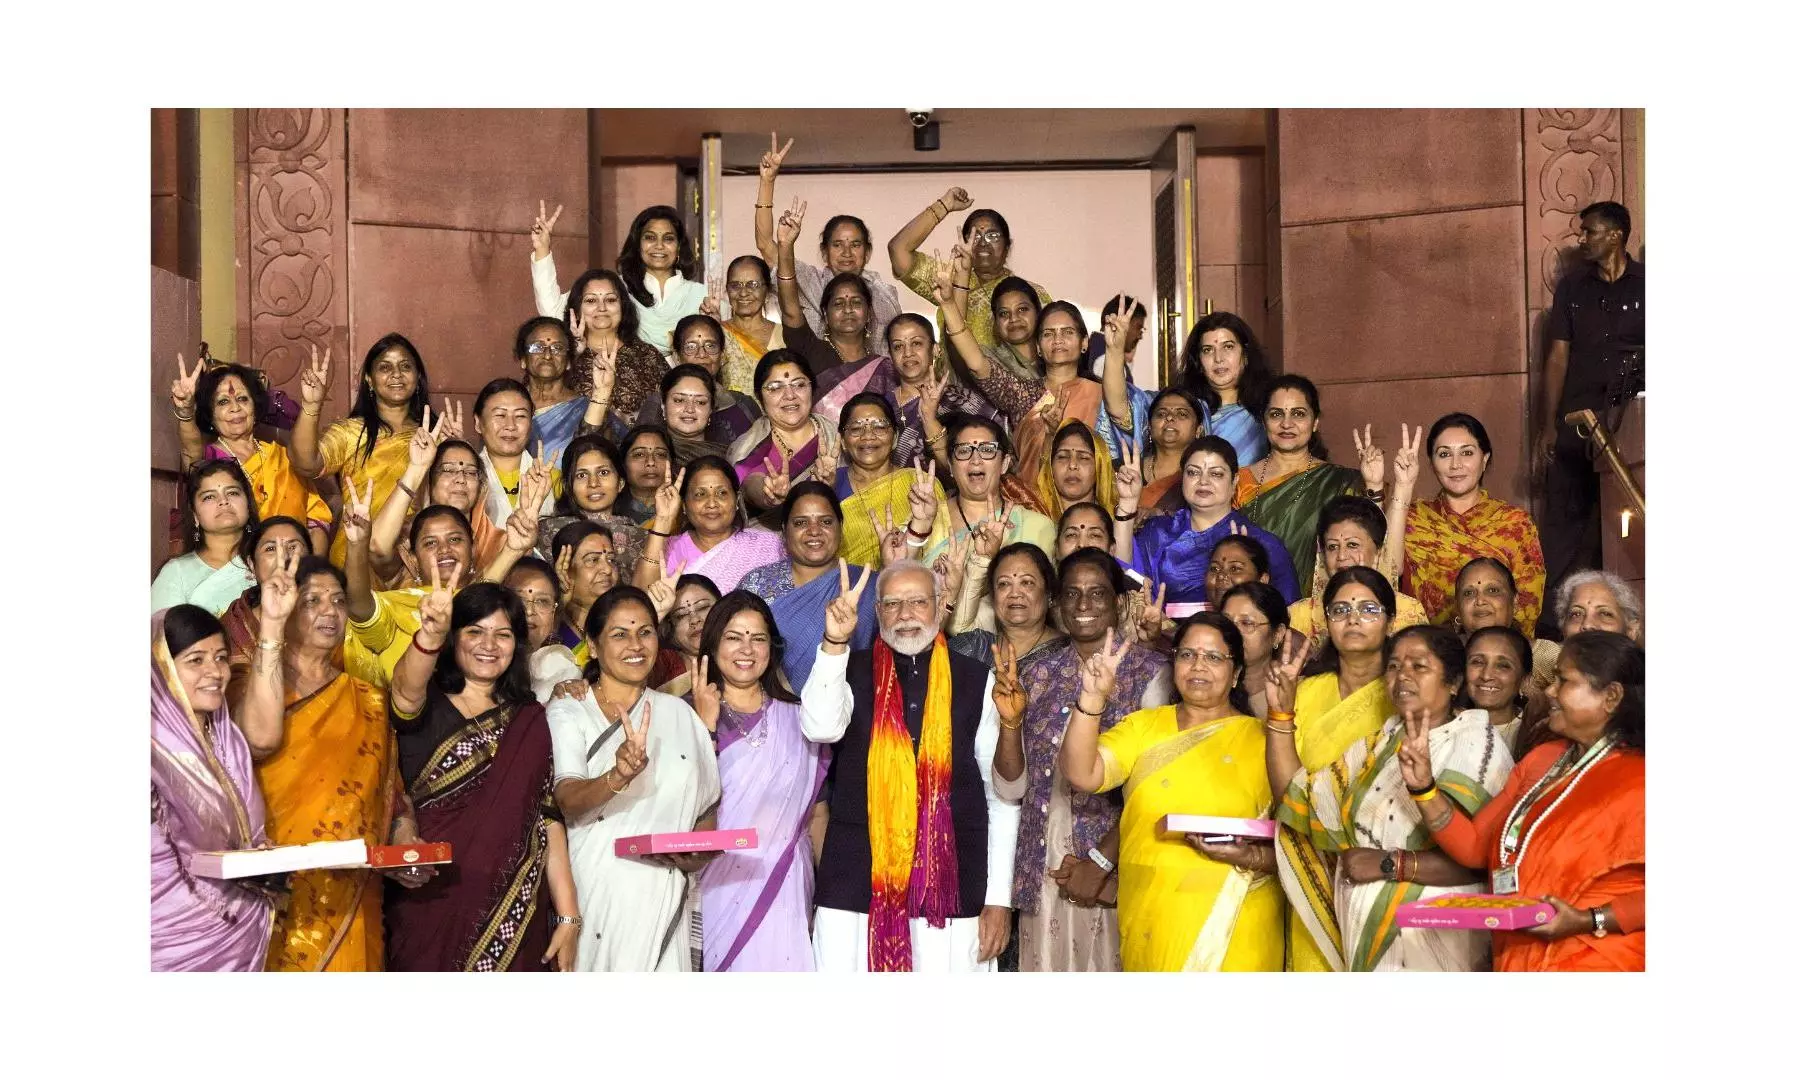 Luminaries of Progress: A Tribute to Women at the Helm